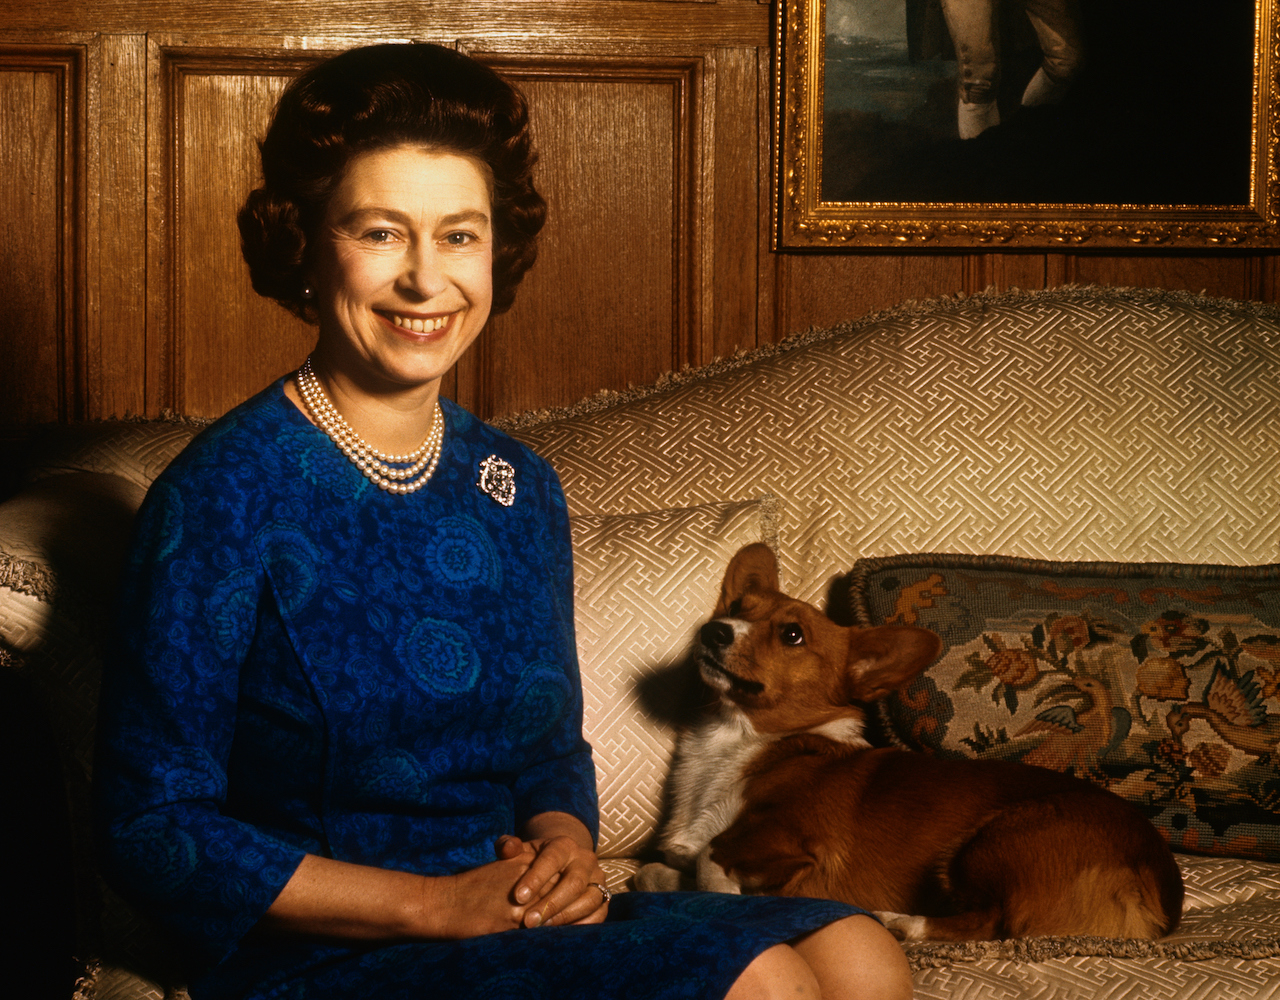 Queen Elizabeth II, pictured with a pet corgi c. 1970, owned a few corgis that would attack.